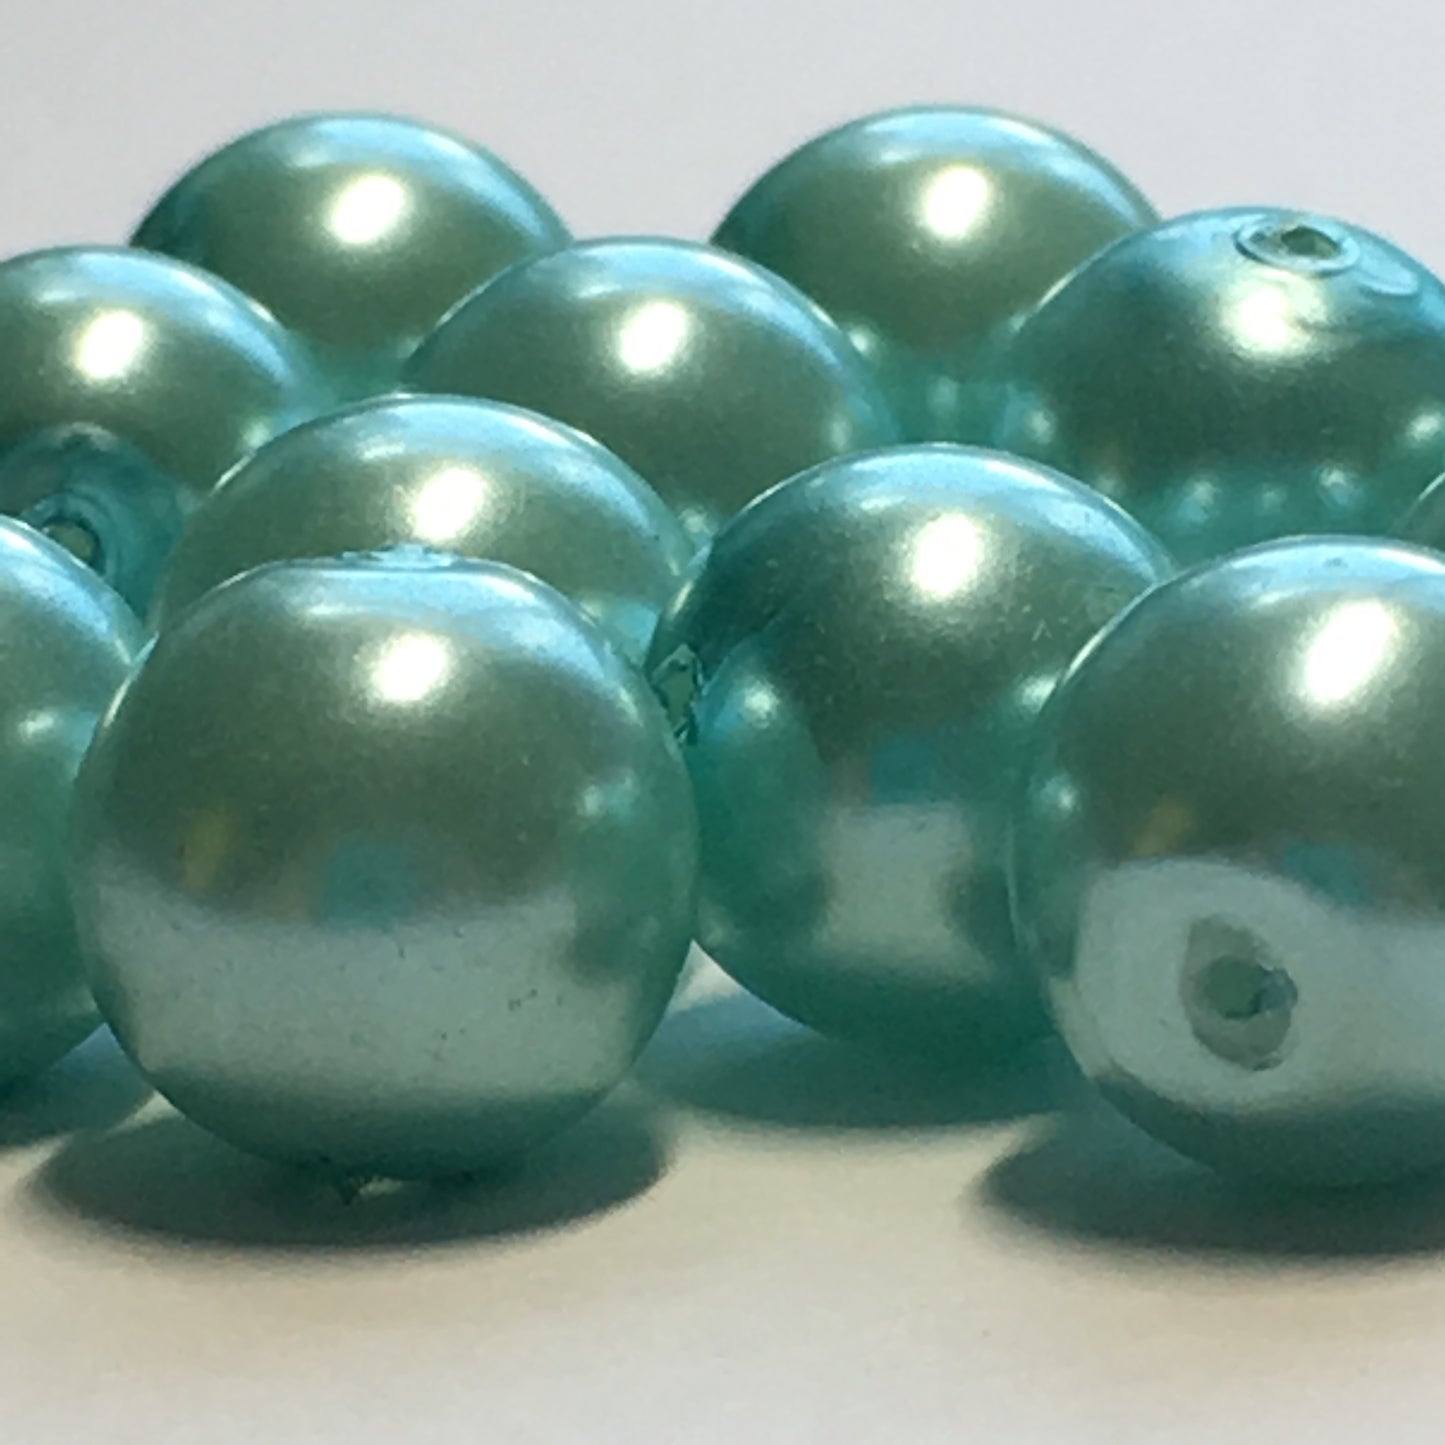 Light Blue Pearl Glass Round Beads, 10 mm, 15 Beads